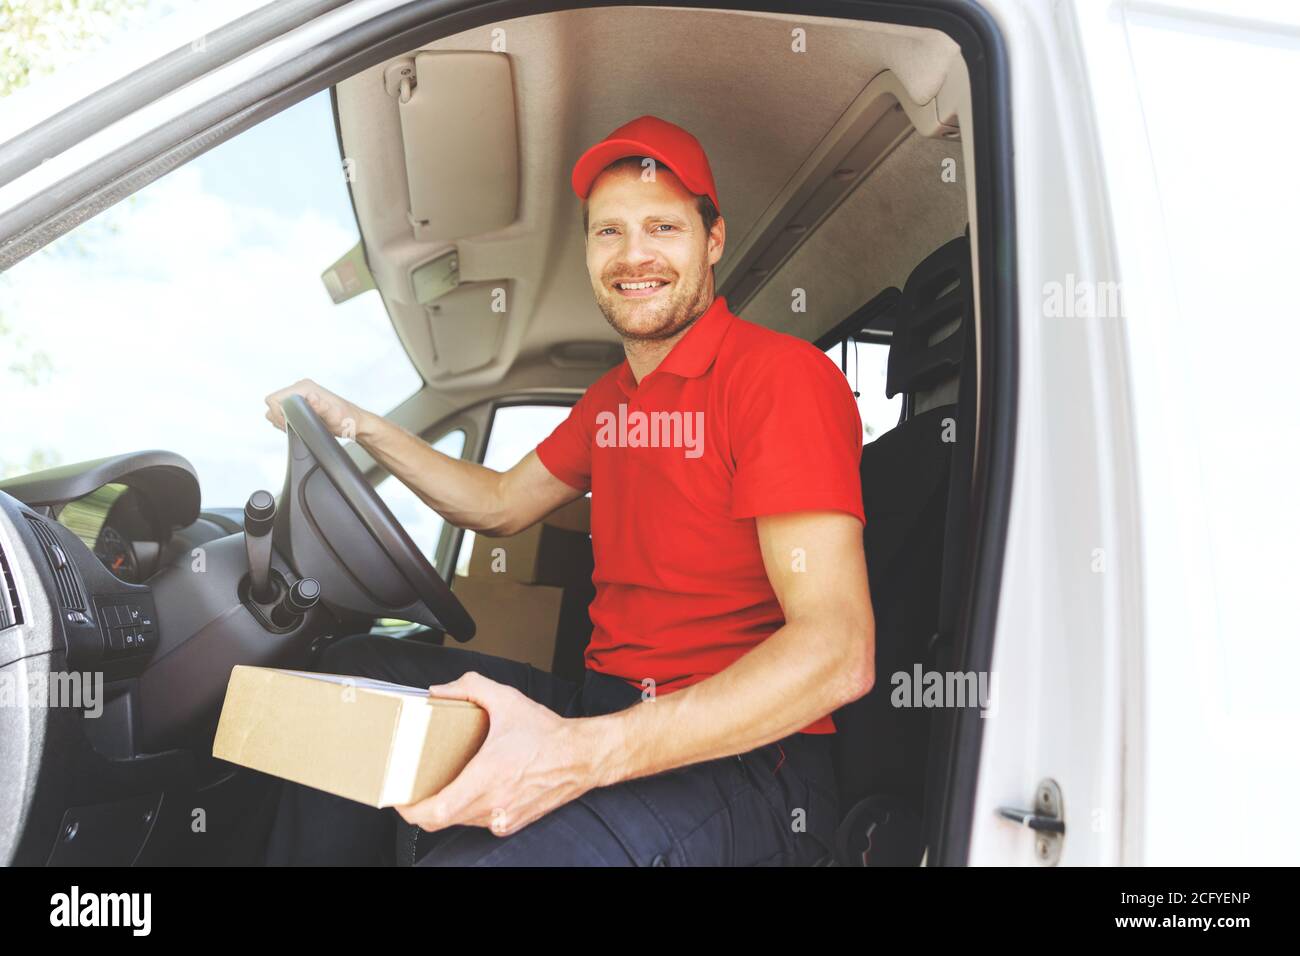 https://c8.alamy.com/comp/2CFYENP/smiling-transportation-service-driver-in-red-uniform-sitting-in-van-with-box-in-hand-2CFYENP.jpg